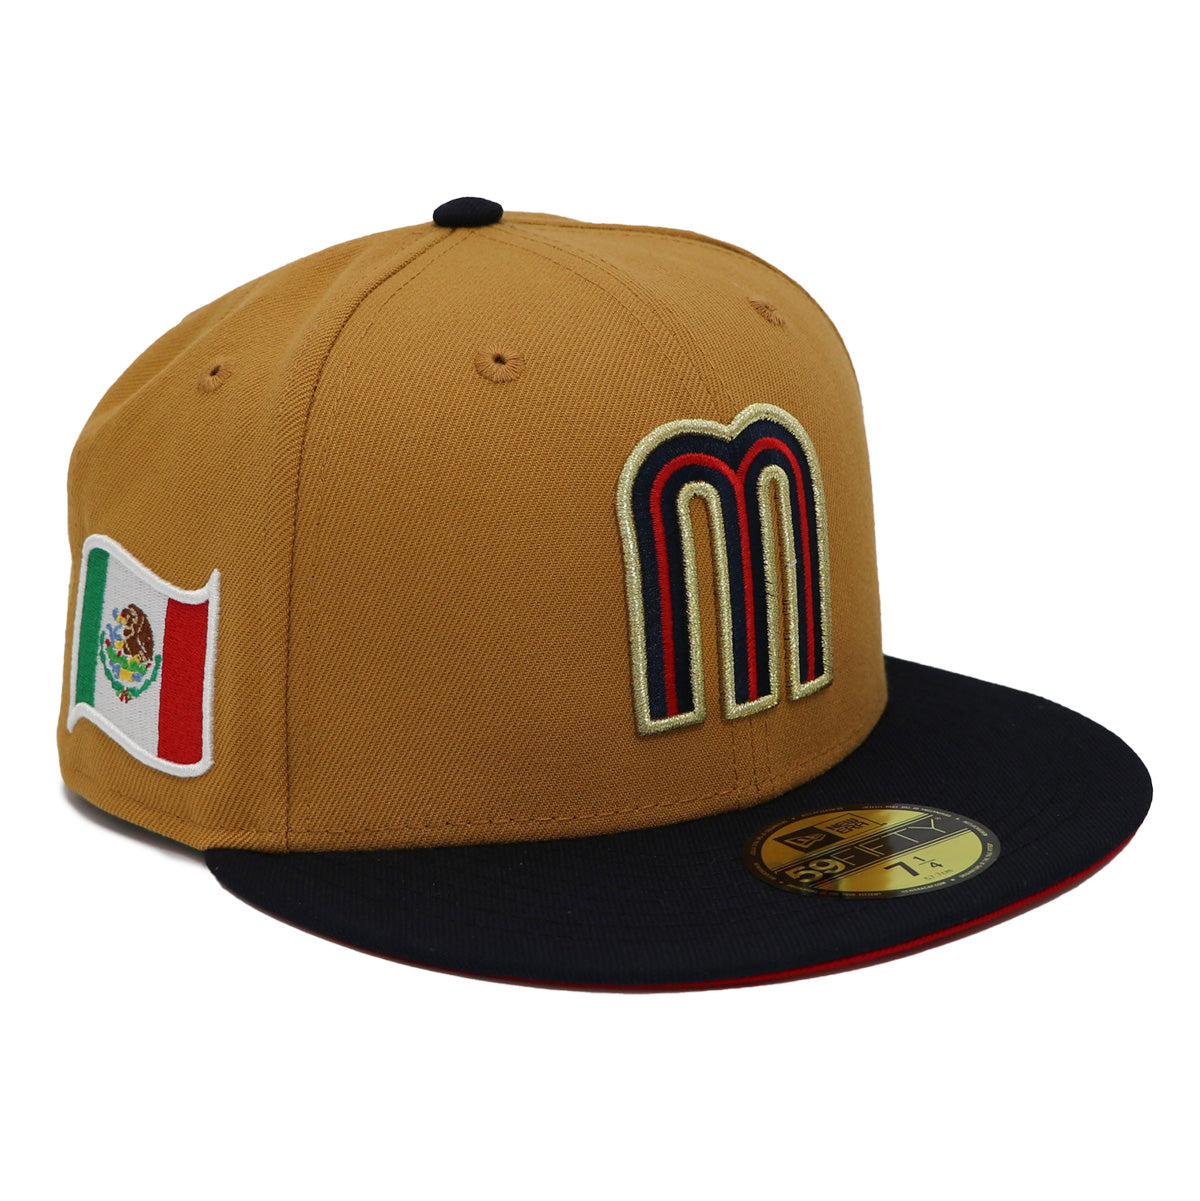 New Era 59Fifty World Baseball Classic Mexico Fitted Hat Black